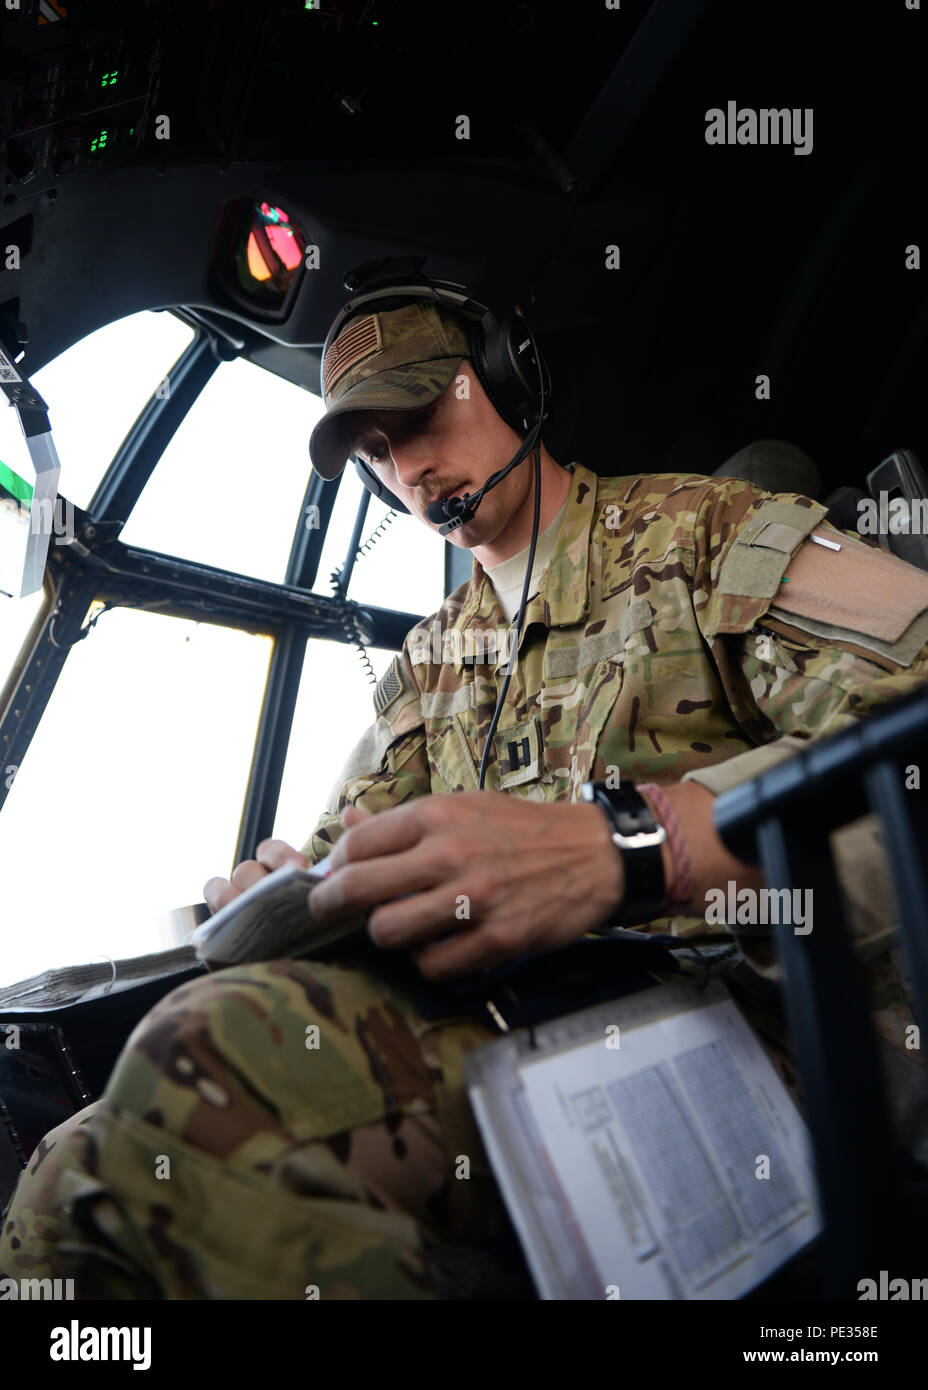 U.S. Air Force Capt. Matt Buchholtz, 774th Expeditionary Airlift Squadron C-130J Super Hercules pilot, turns on controls in preparation for takeoff Sept. 3, 2015, at Al Udeid Air Base, Qatar. Buchholtz and his team, who are deployed from Little Rock Air Force Base, Ark., fly various combat missions throughout Afghanistan supporting missions ranging from medical evacuations to cargo and passenger transports. (U.S. Air Force photo by Senior Airman Cierra Presentado/Released) Stock Photo